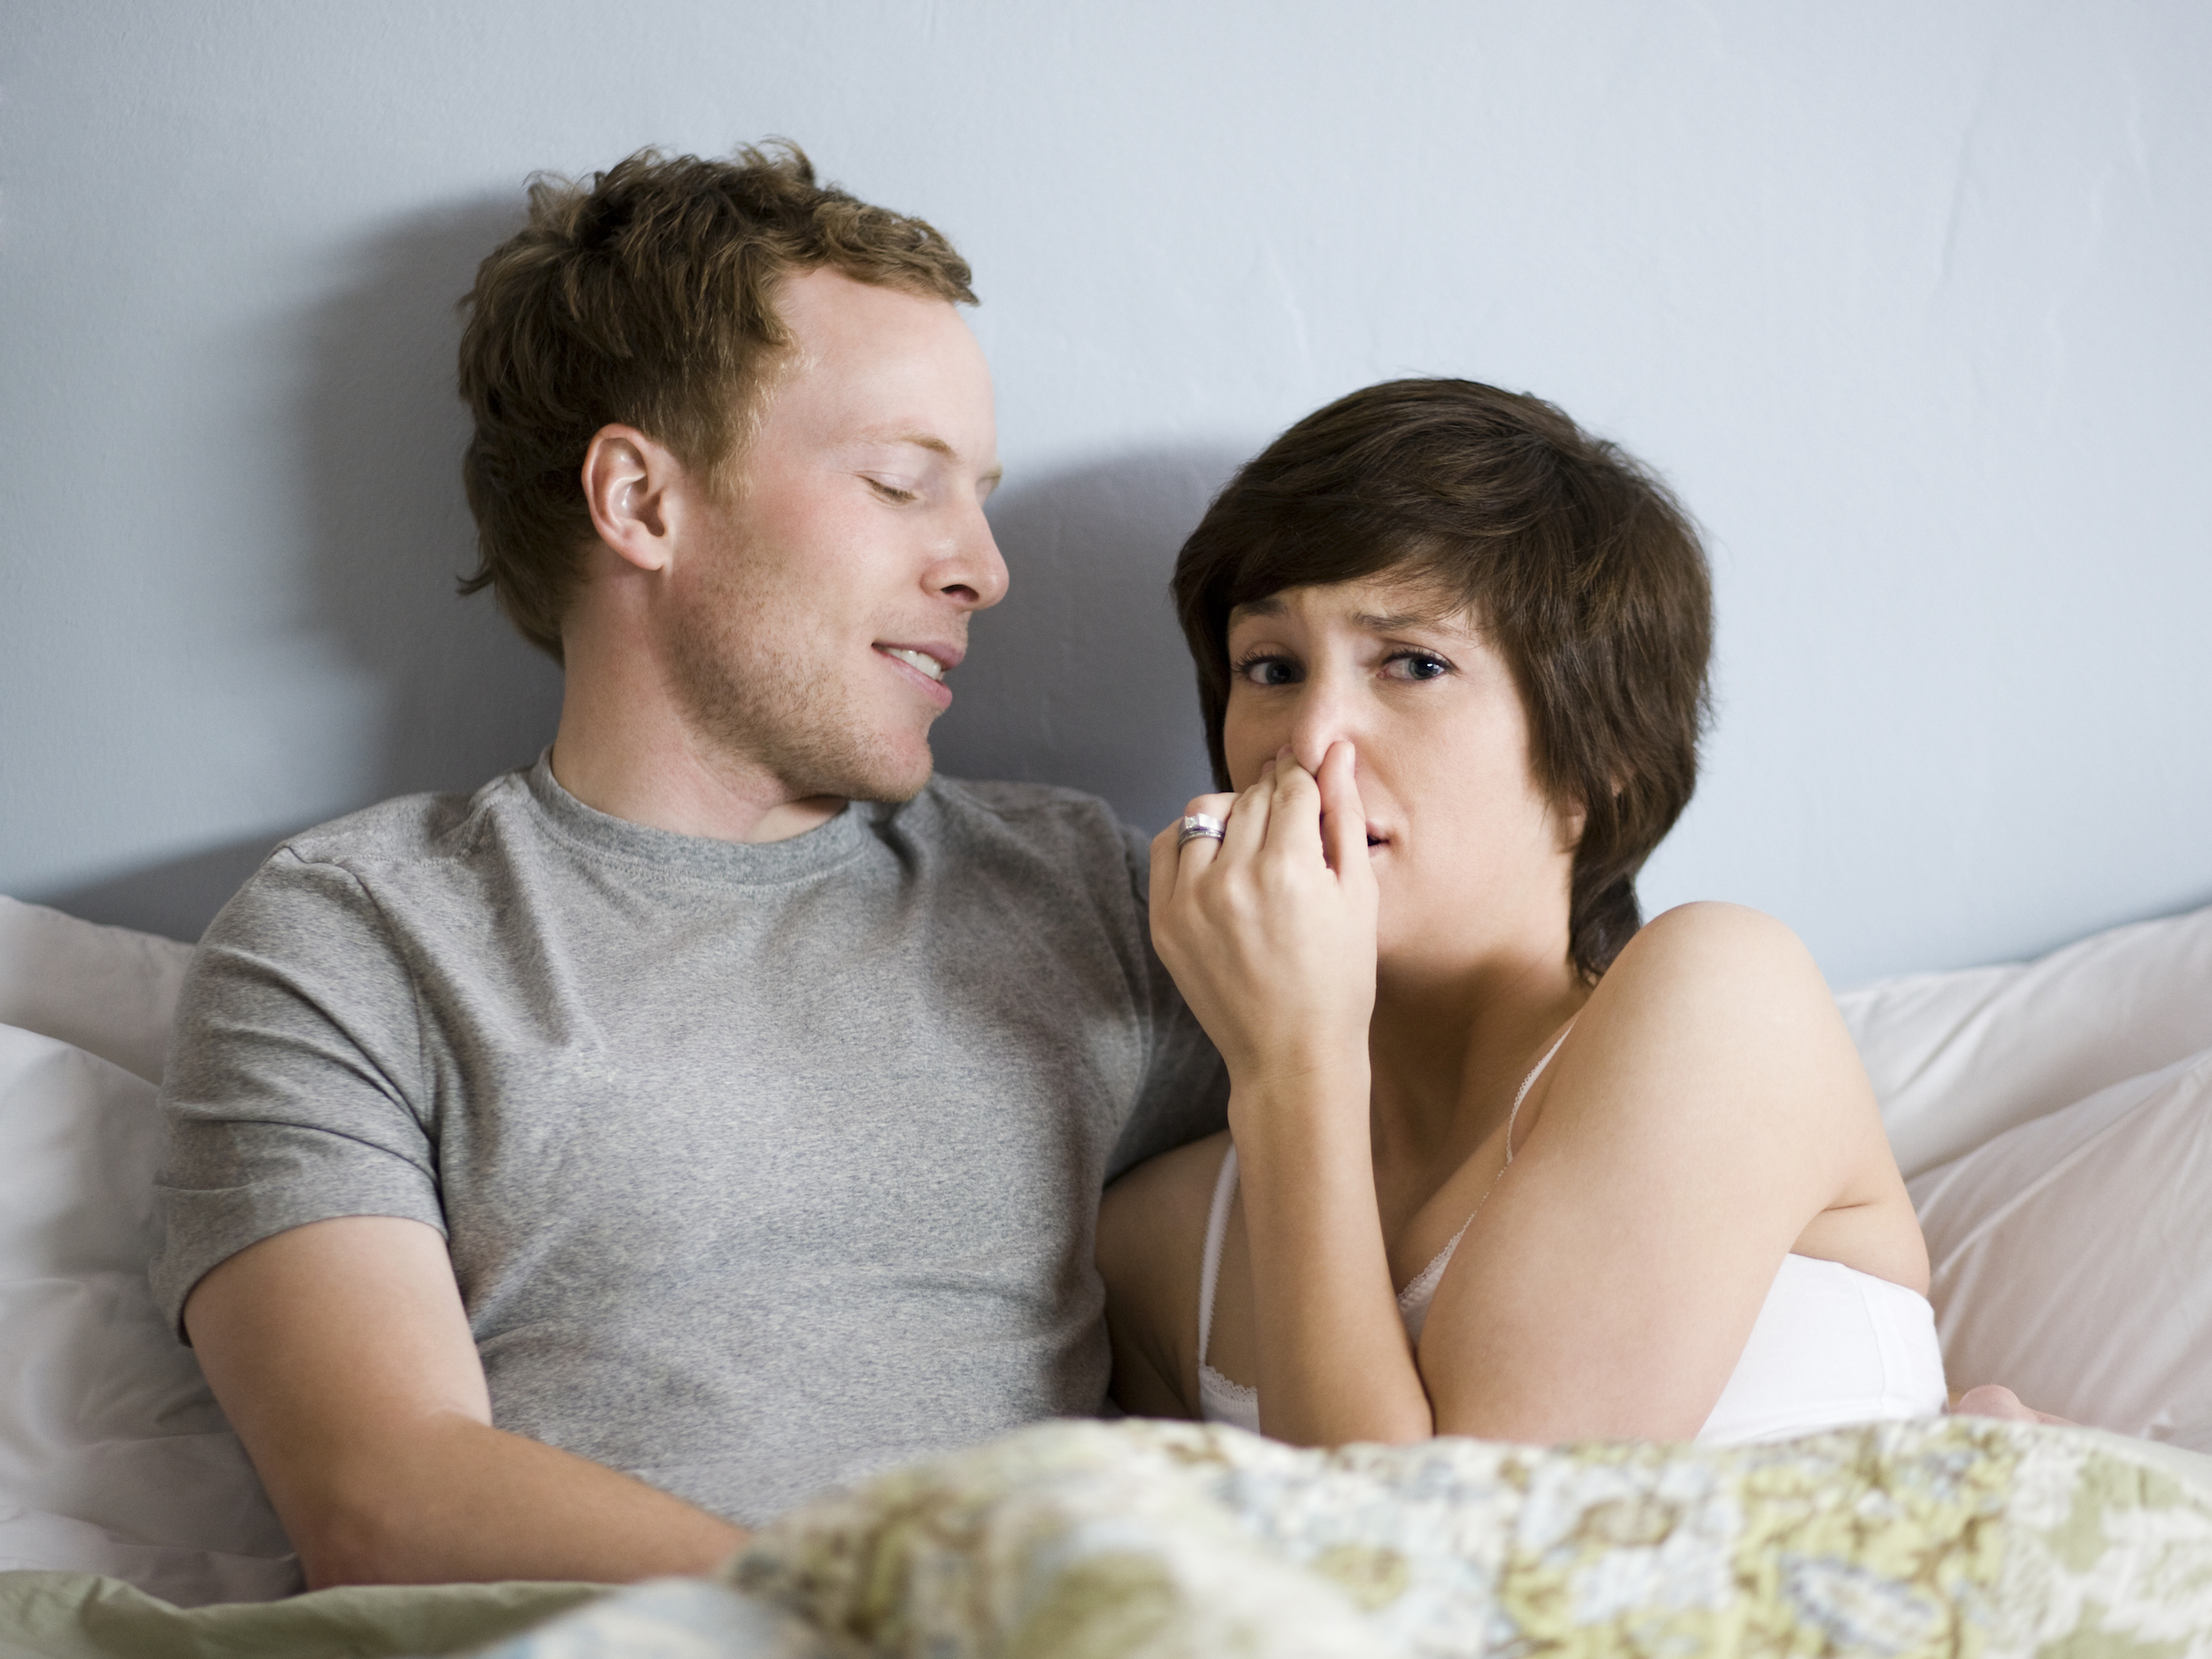 A woman in bed with a man and plugging her nose